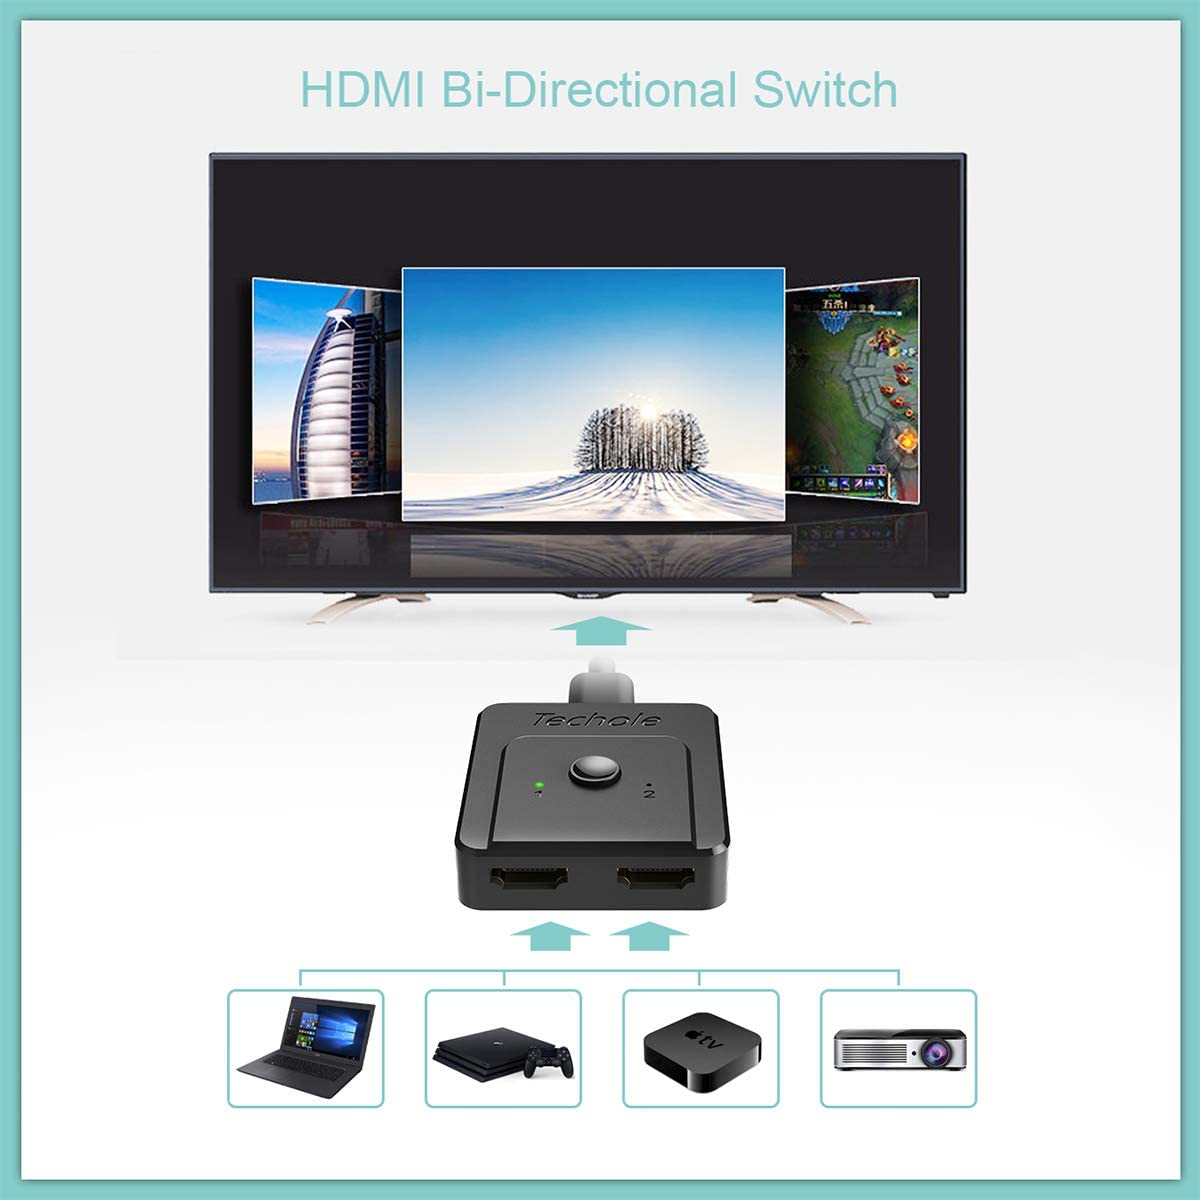 HDMI Switch 4K HDMI Splitter-Techole Updated Bi-Directional HDMI Switcher 1 in 2 Out - e4cents